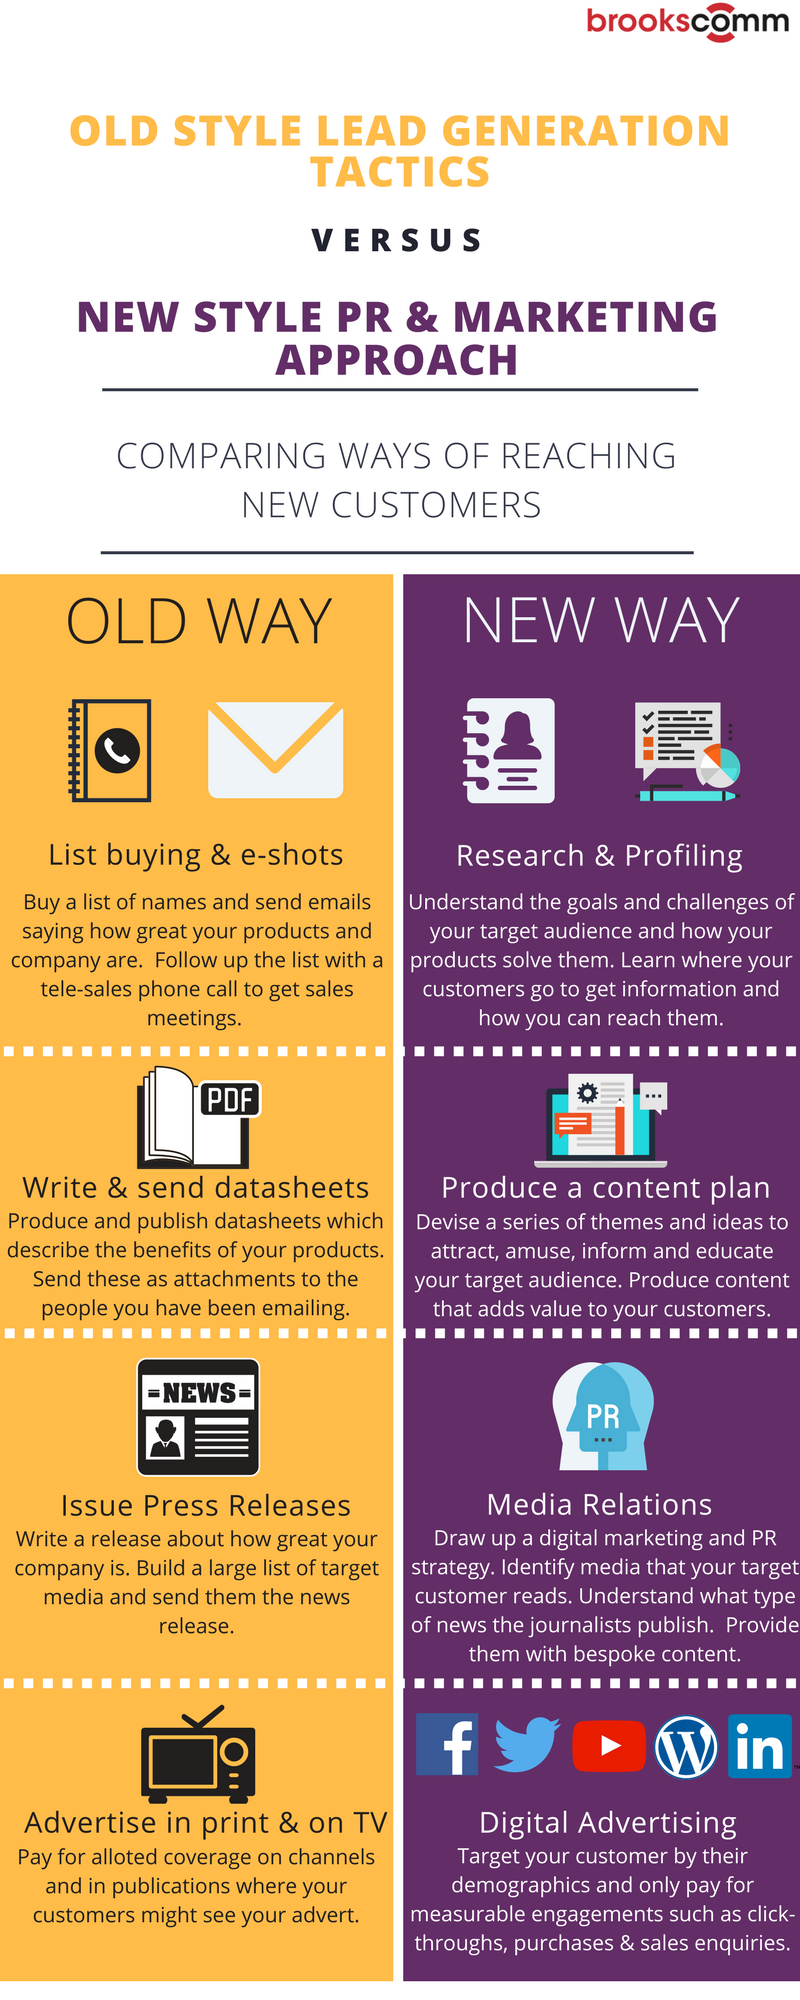 comparing-ways-of-reaching-new-customers-infographic